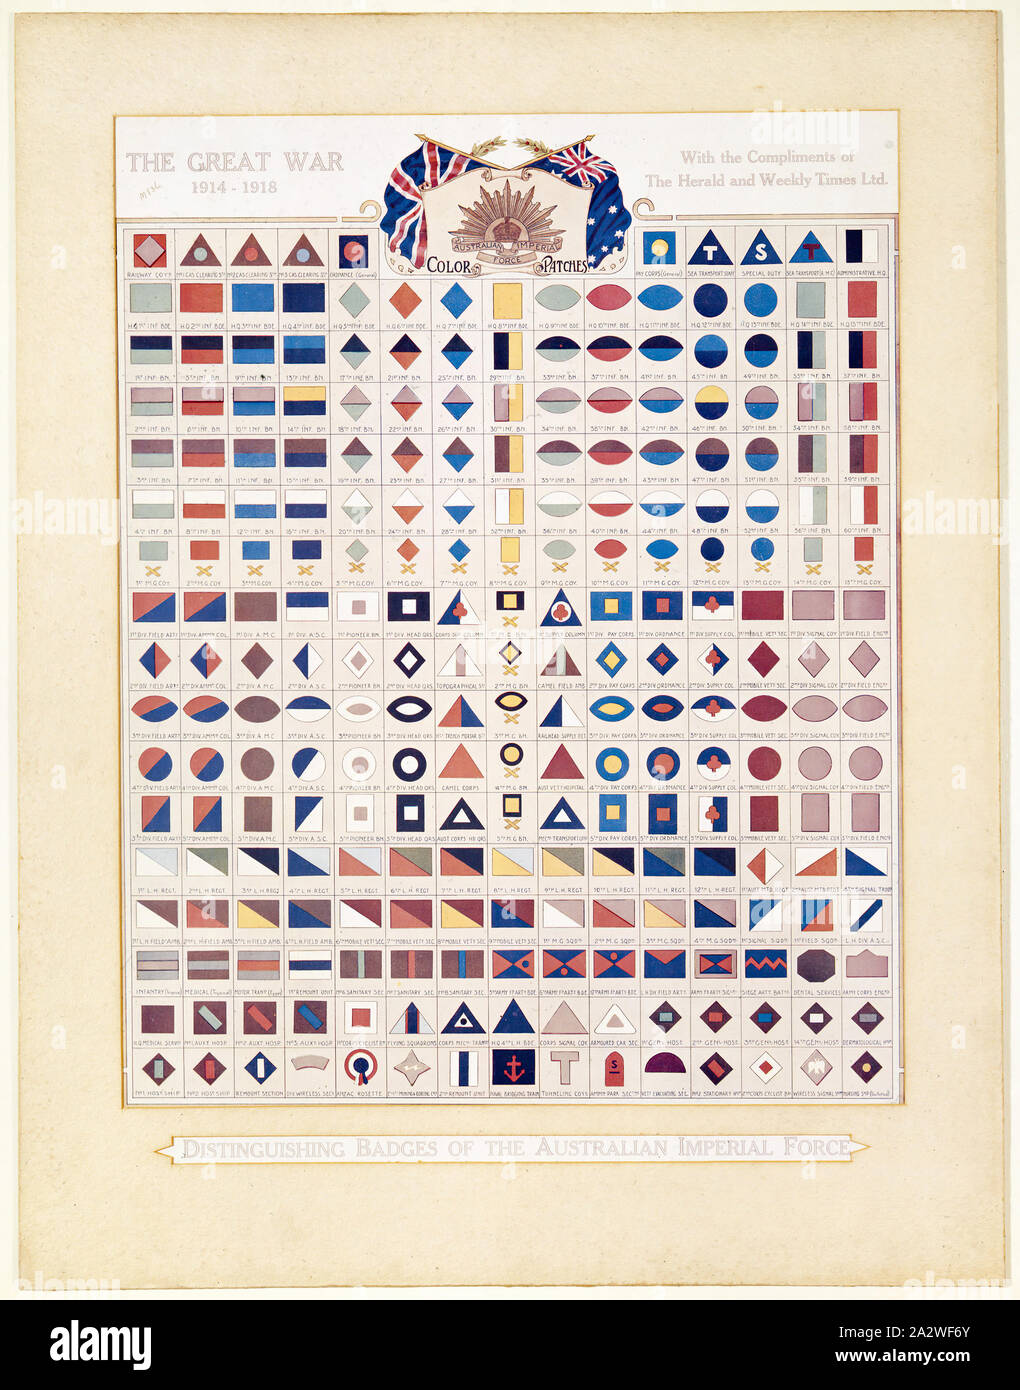 Transparency - 'Distinguishing Badges of the Australian Imperial Force, World War I, Great War', 1914-1919, Alternative Name(s): Unit Colours, Colour Patches Transparency of colour poster depicting the badges or colours of units of the Australian Imperial Force, World War I, 1914-1918. The poster was issued by the Herald and Weekly Times Ltd, during or after World War I. On Thursday 24 April 1919 the Gippsland Times advertised this poster or a similar one for sale for two shillings from a newsagency Stock Photo